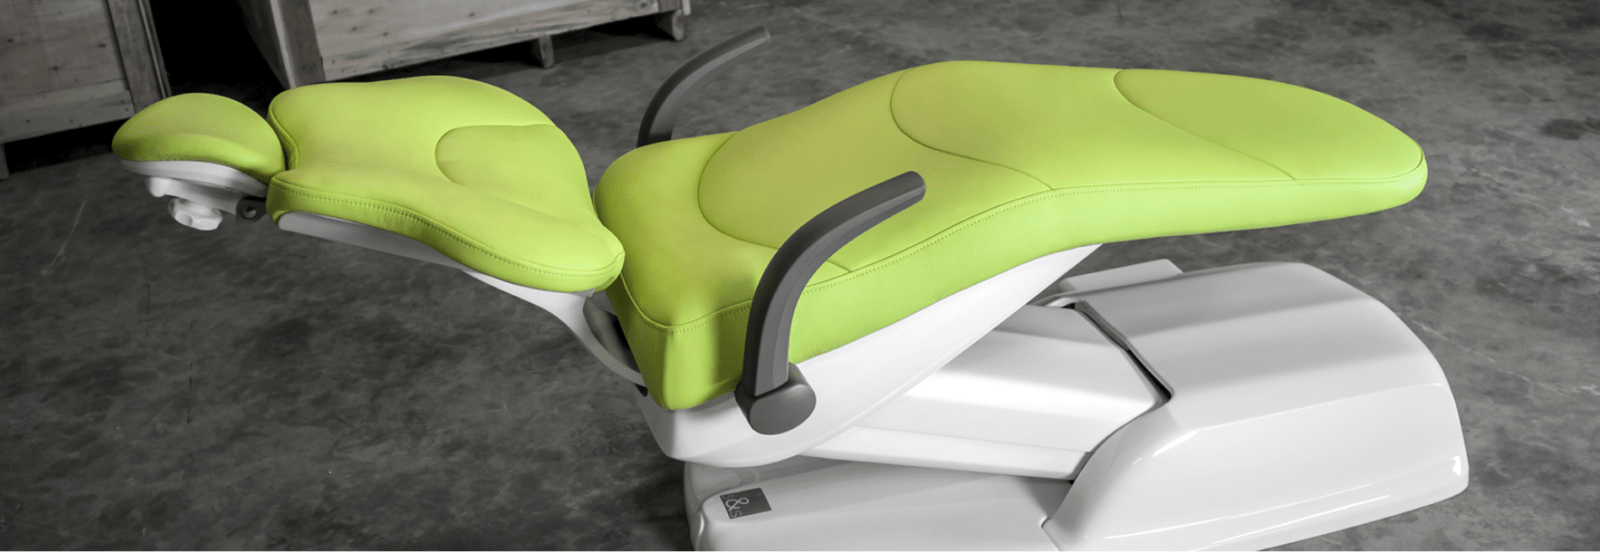 Stand Alone Dental Chairs